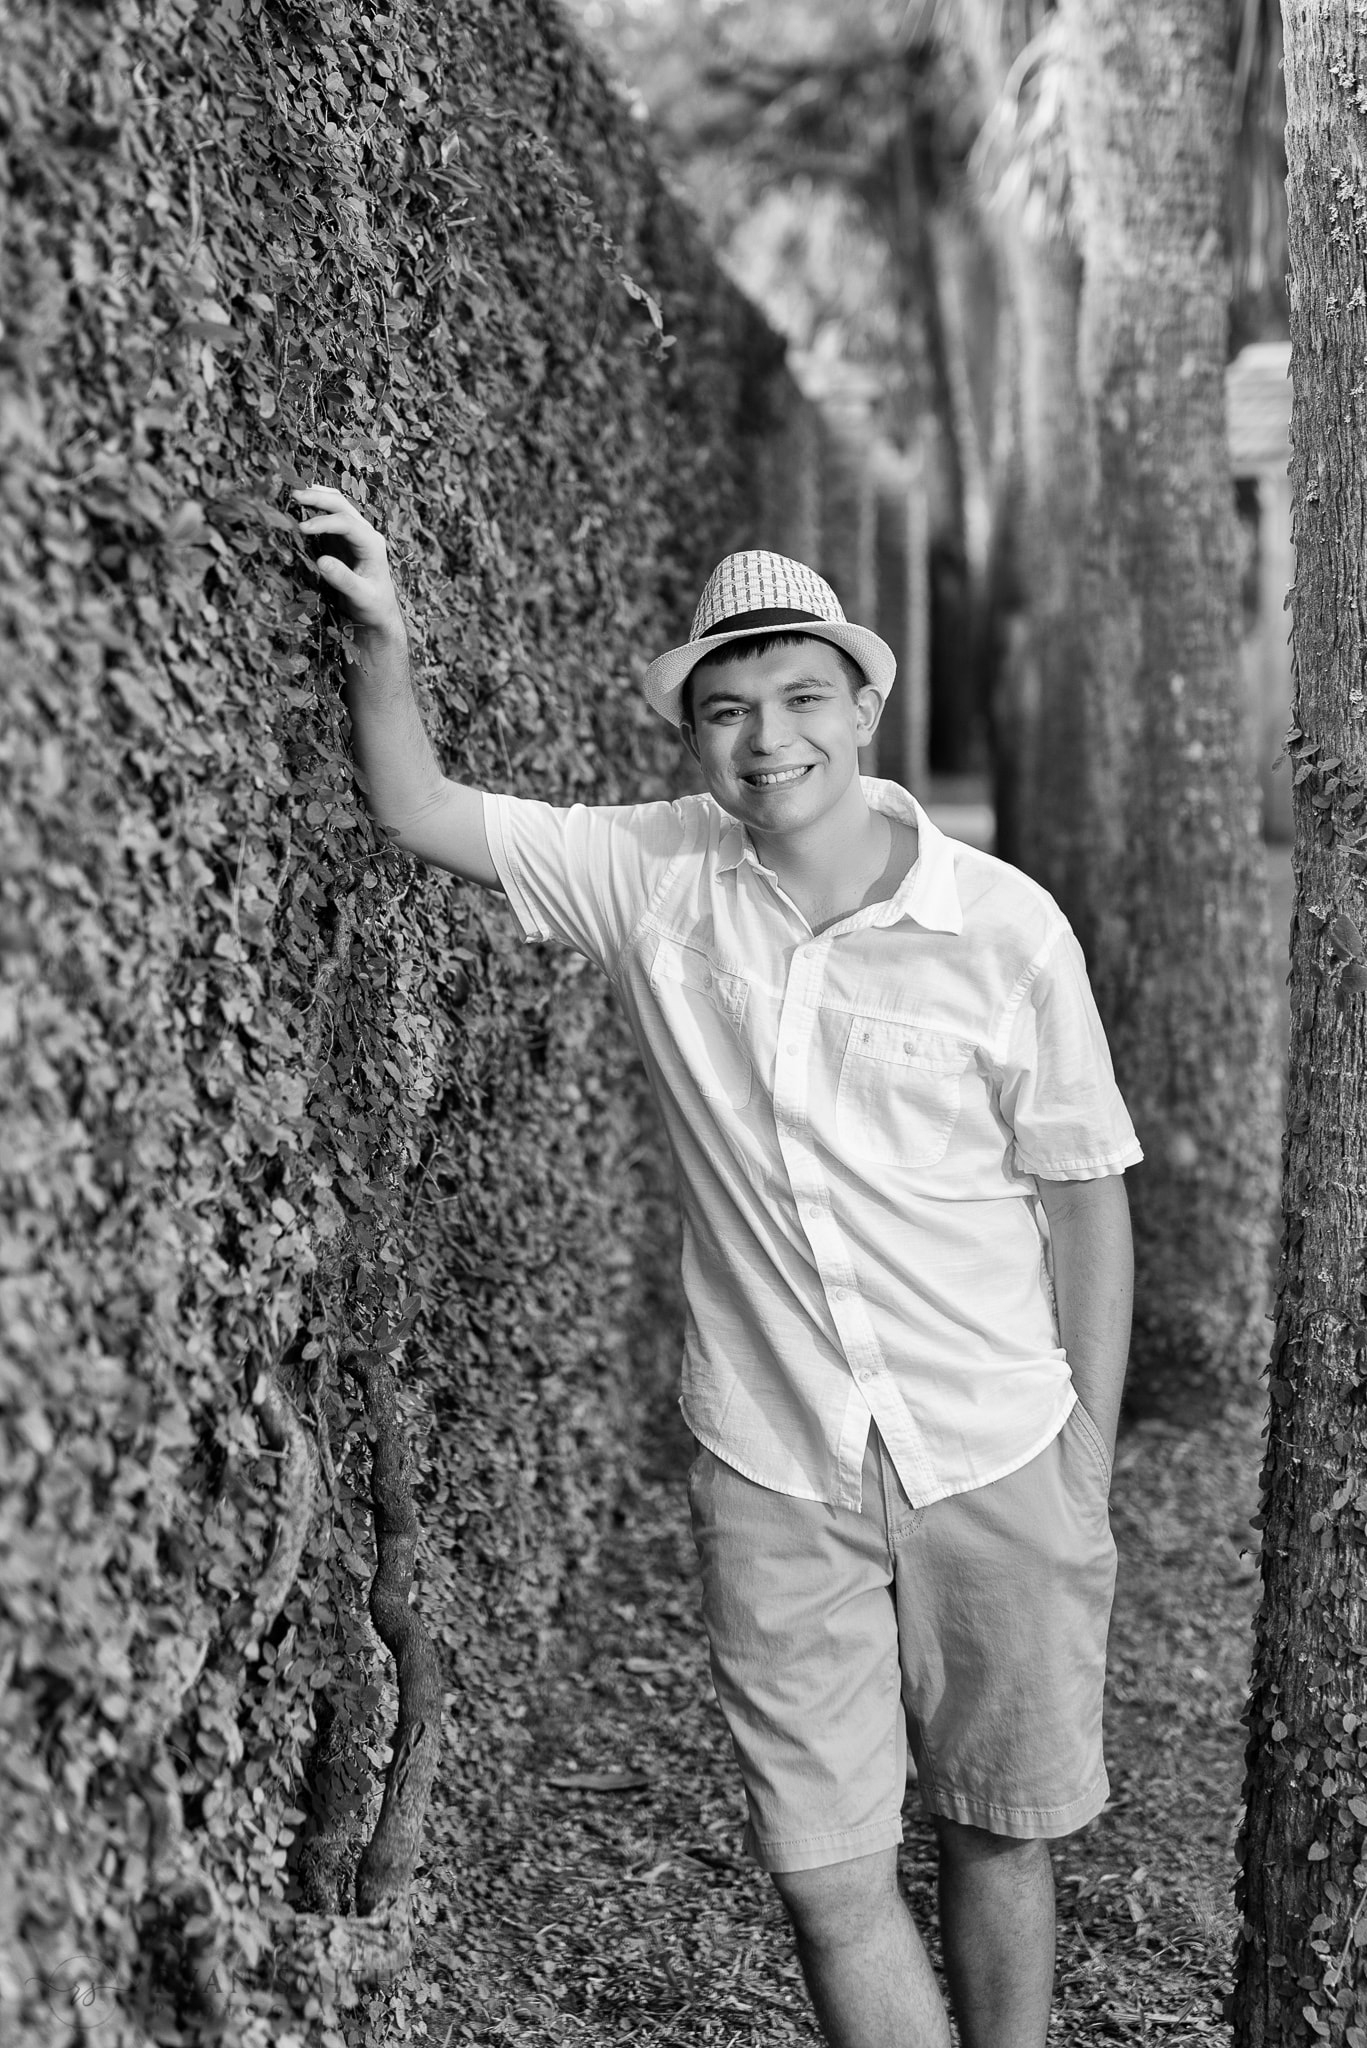 Leaning against the castle wall in black and white - Huntington Beach State Park